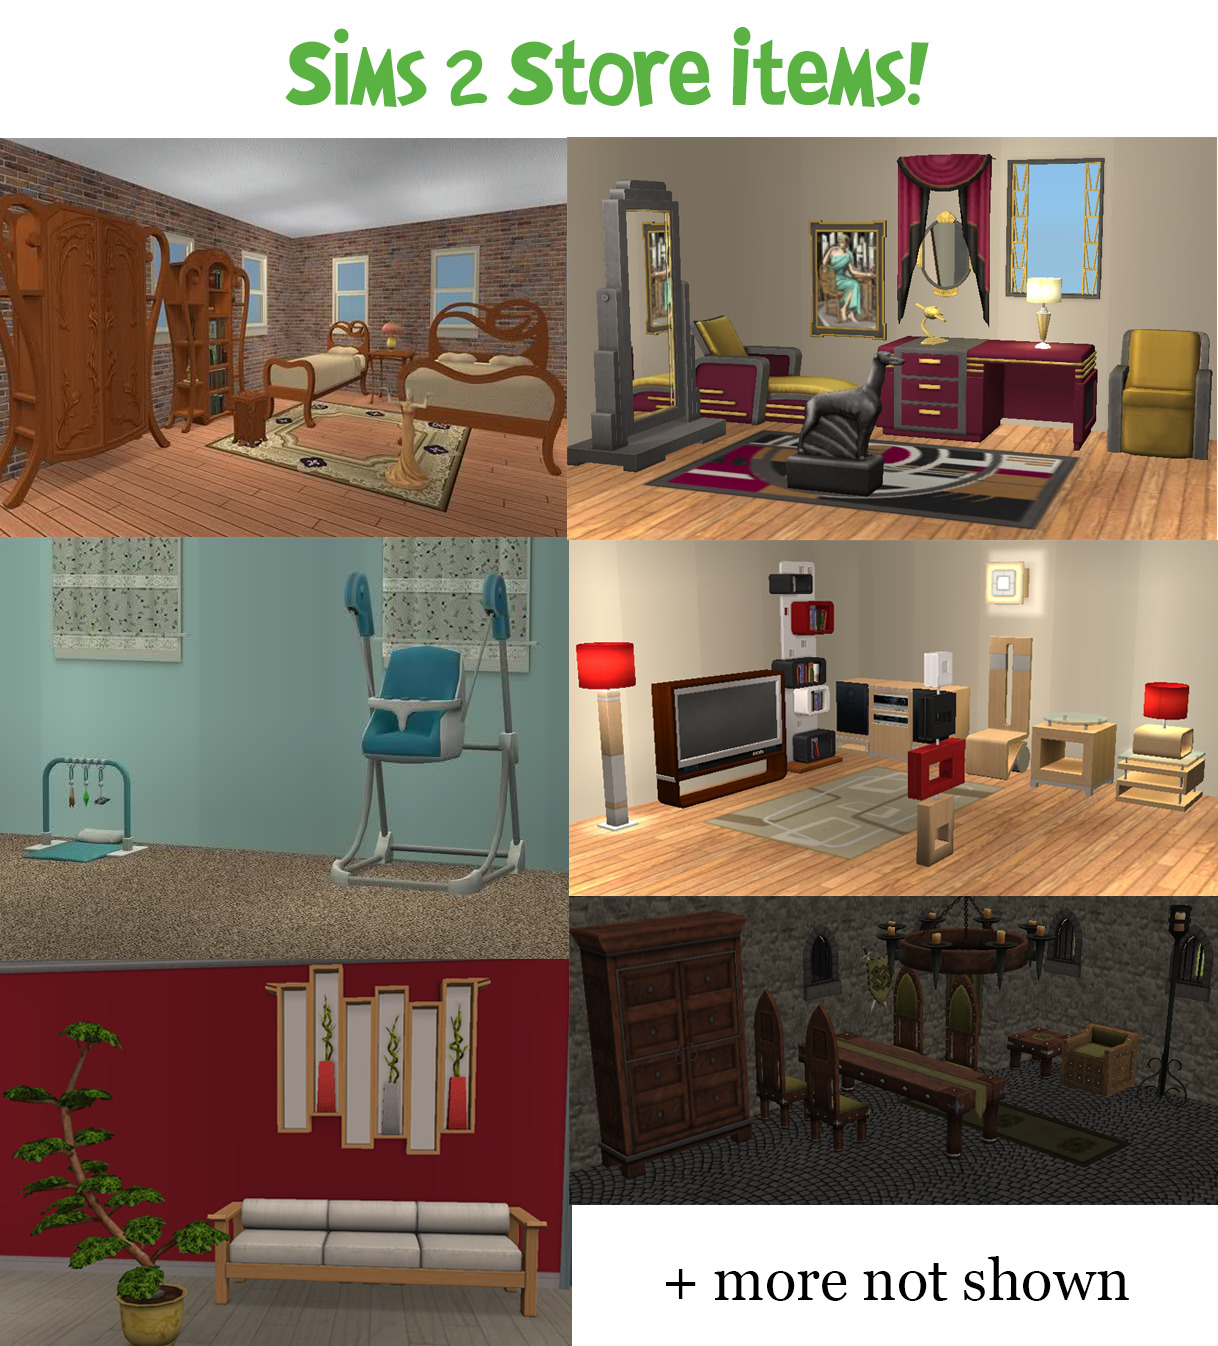 sims 2 complete collection origin